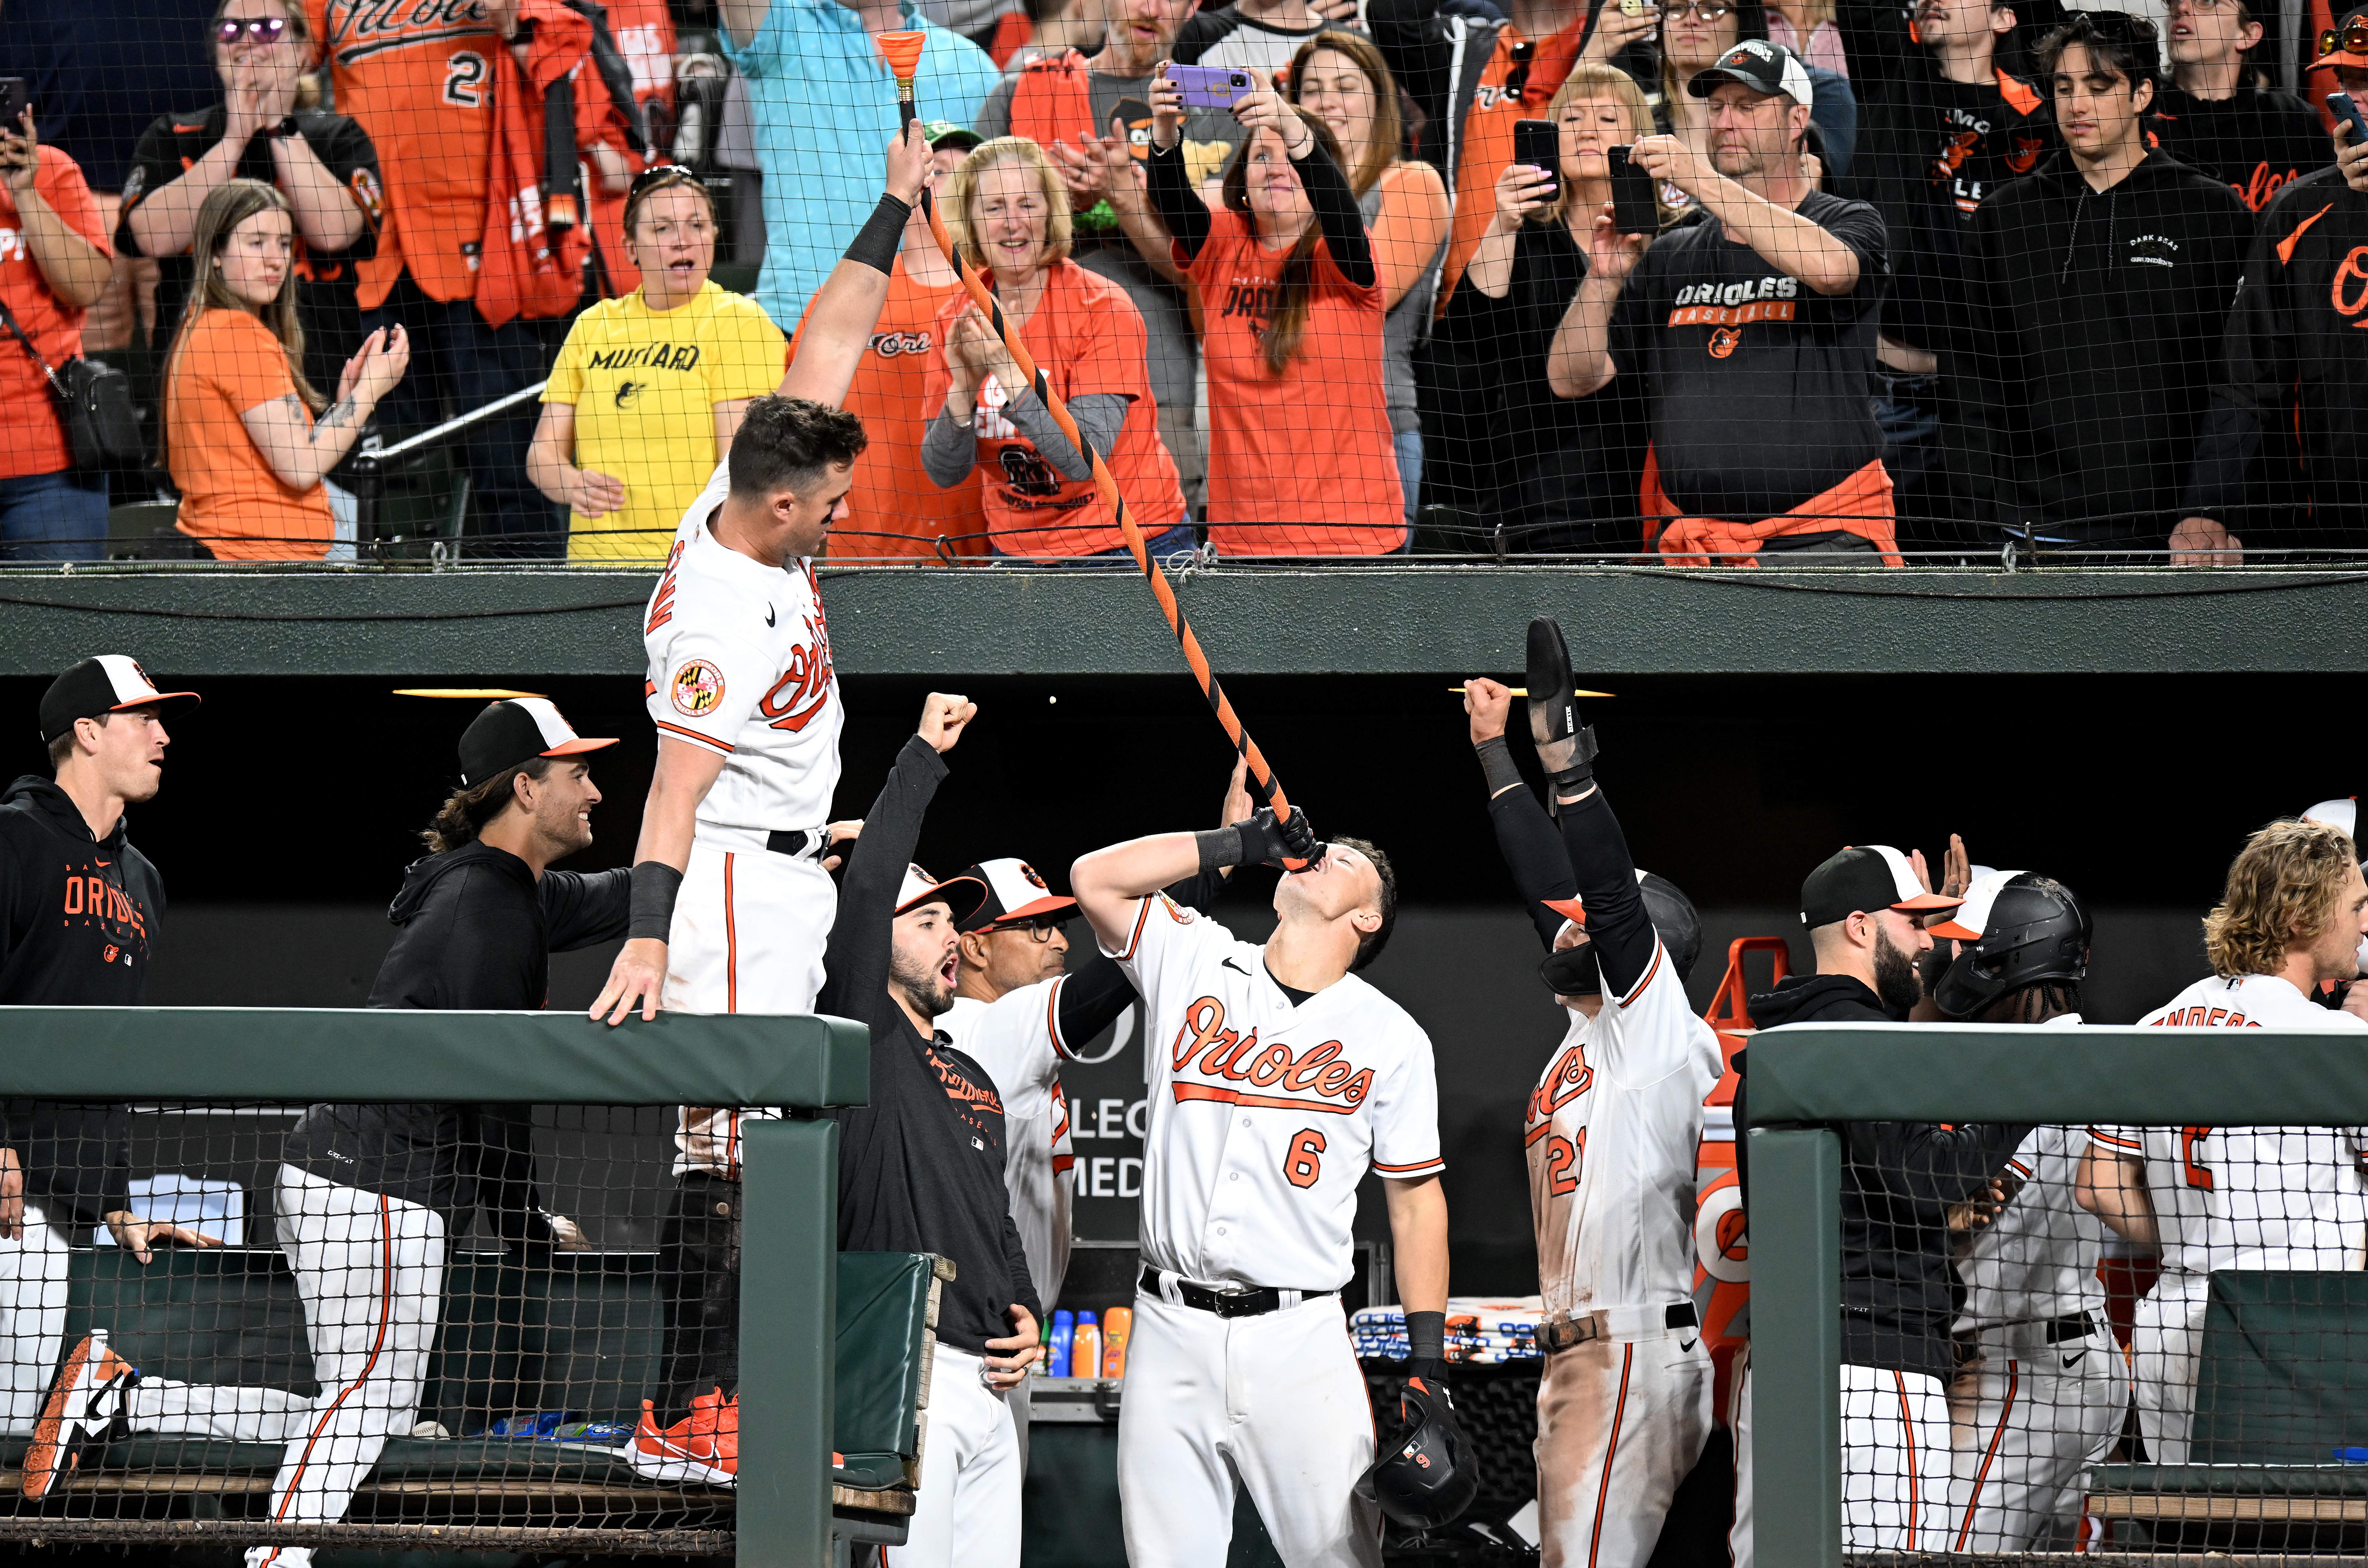 Fan guide for Orioles fans attending home games this year